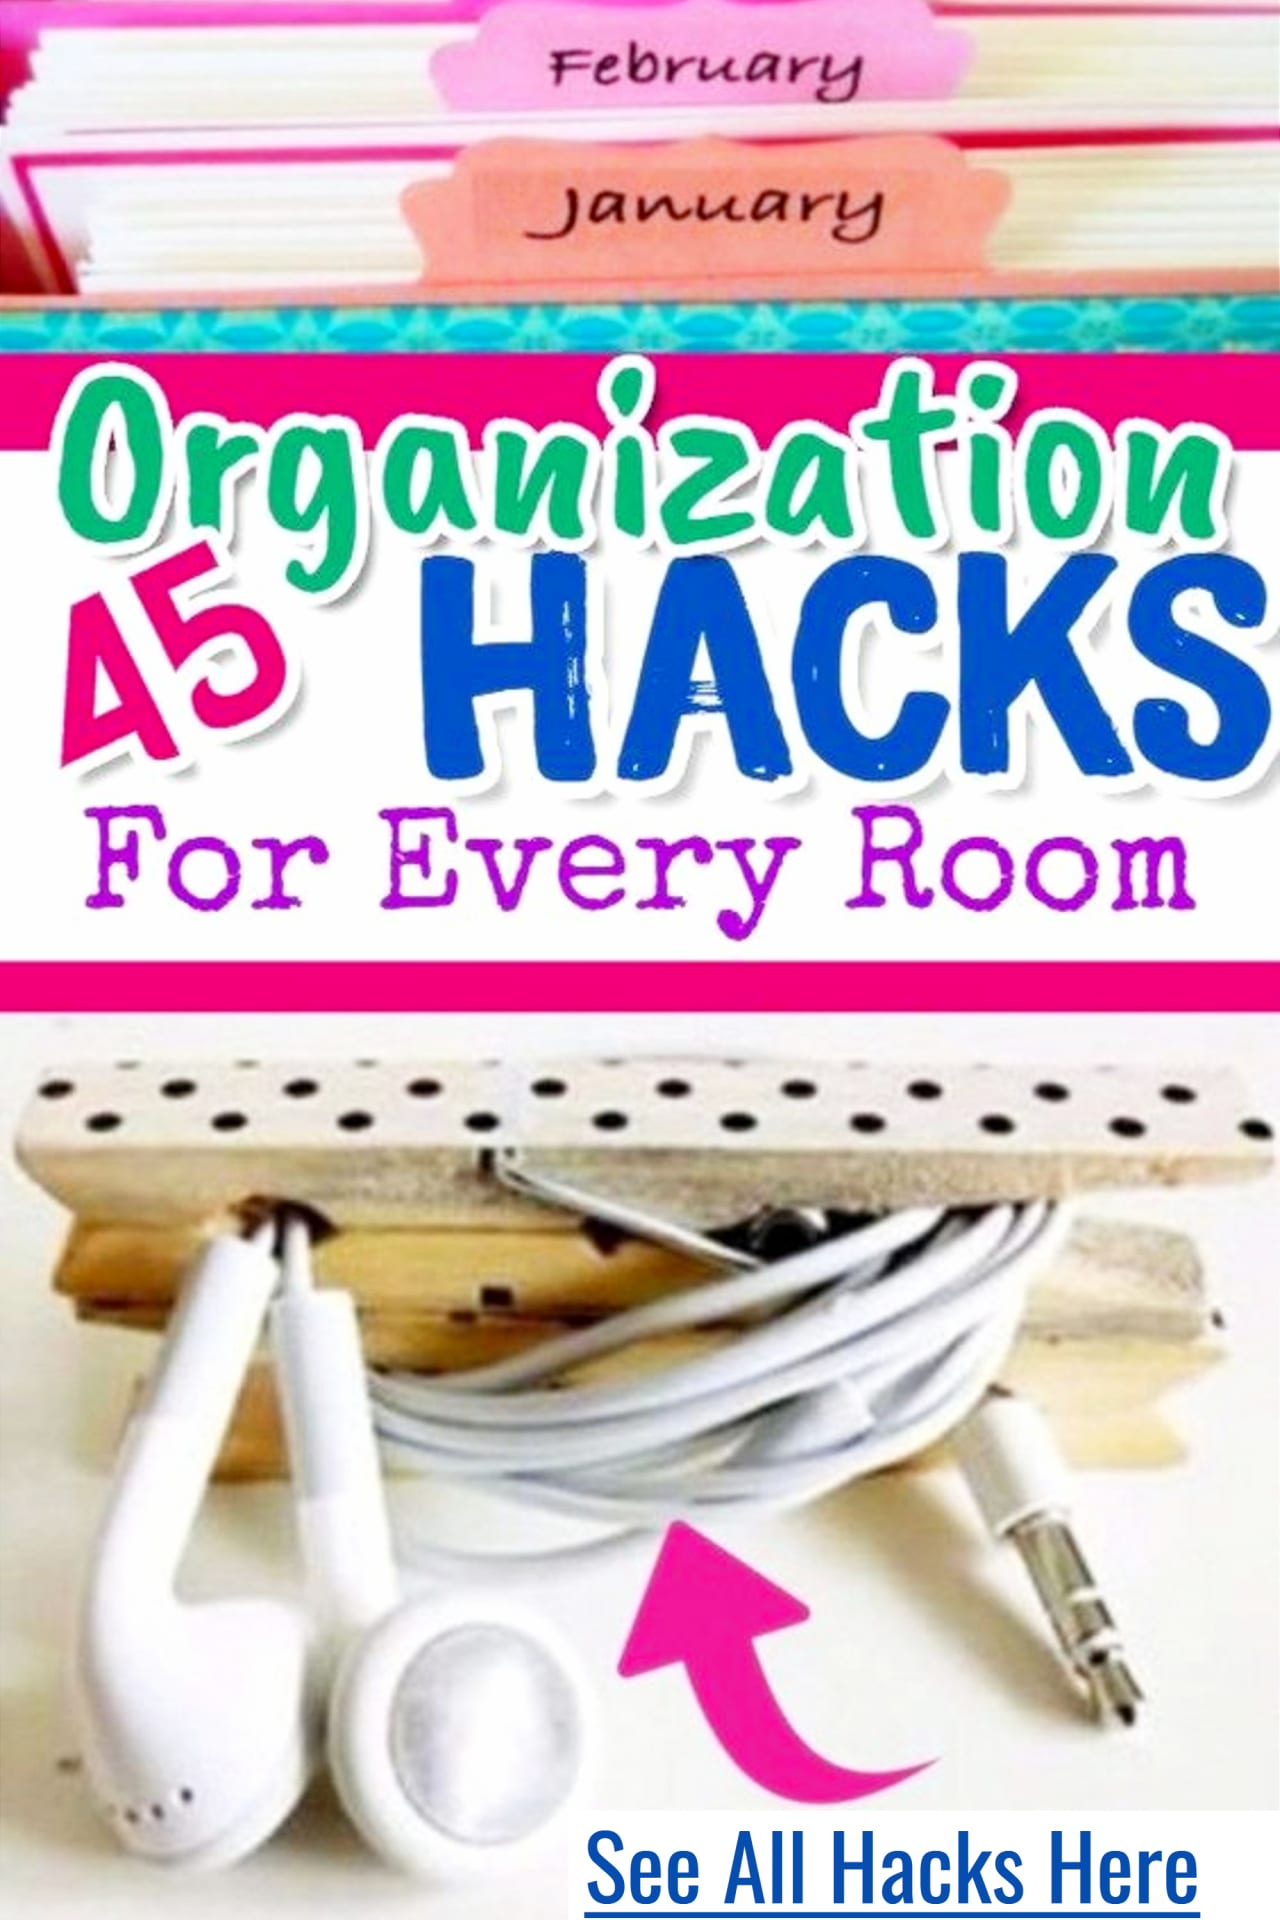 Organization Ideas for the Home - DIY Clutter SOLUTIONS! Declutter and Organize When Feeling OVERWHELMED.  Simple Clutter Tips, Storage Solutions and things to do to have a clean house.  Uncluttering Your Home does NOT have to be overwhelming - these clutter control ideas are decluttering made easy. How to organize your home room by room on a budget step by step (even with kids) for a clutter free home without stress.